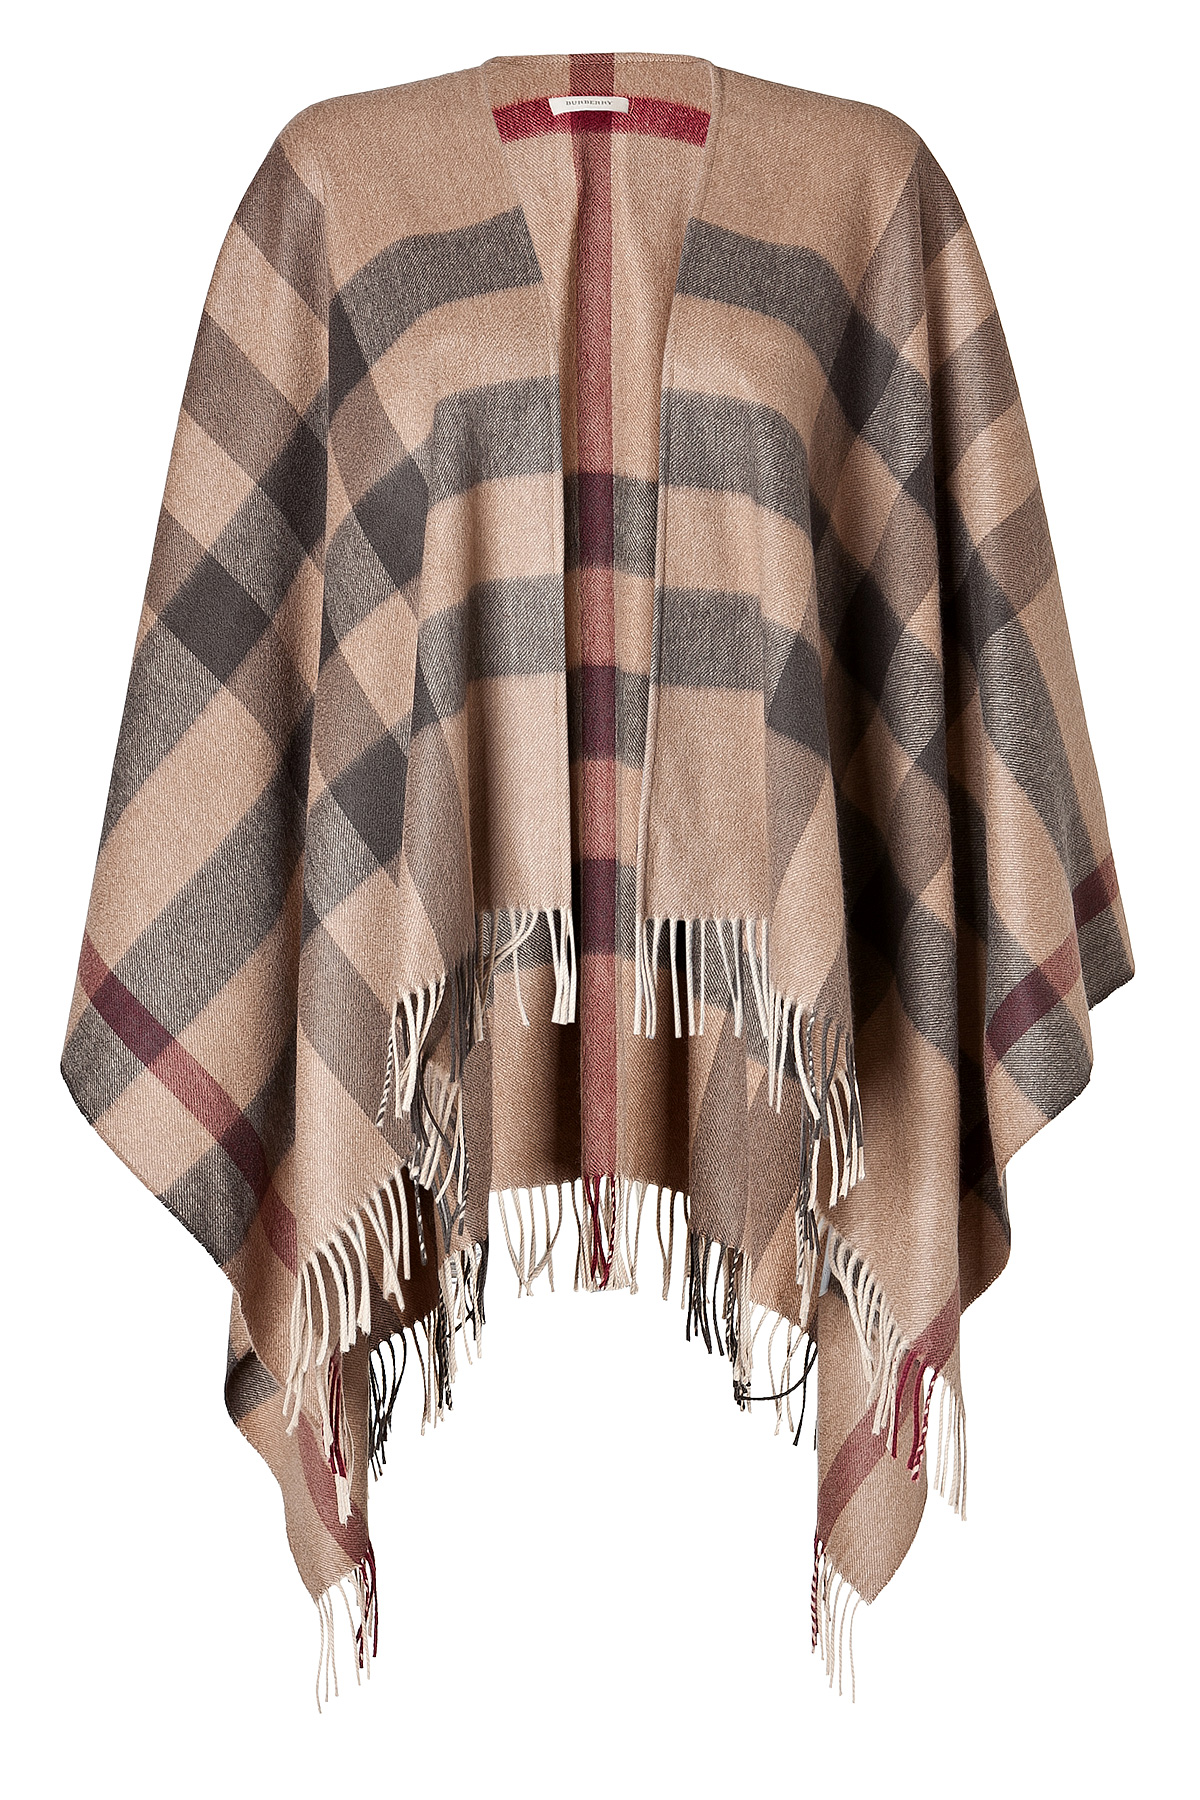 Lyst - Burberry Woolcashmere Collette Cape in Smoked Trench Check in Brown